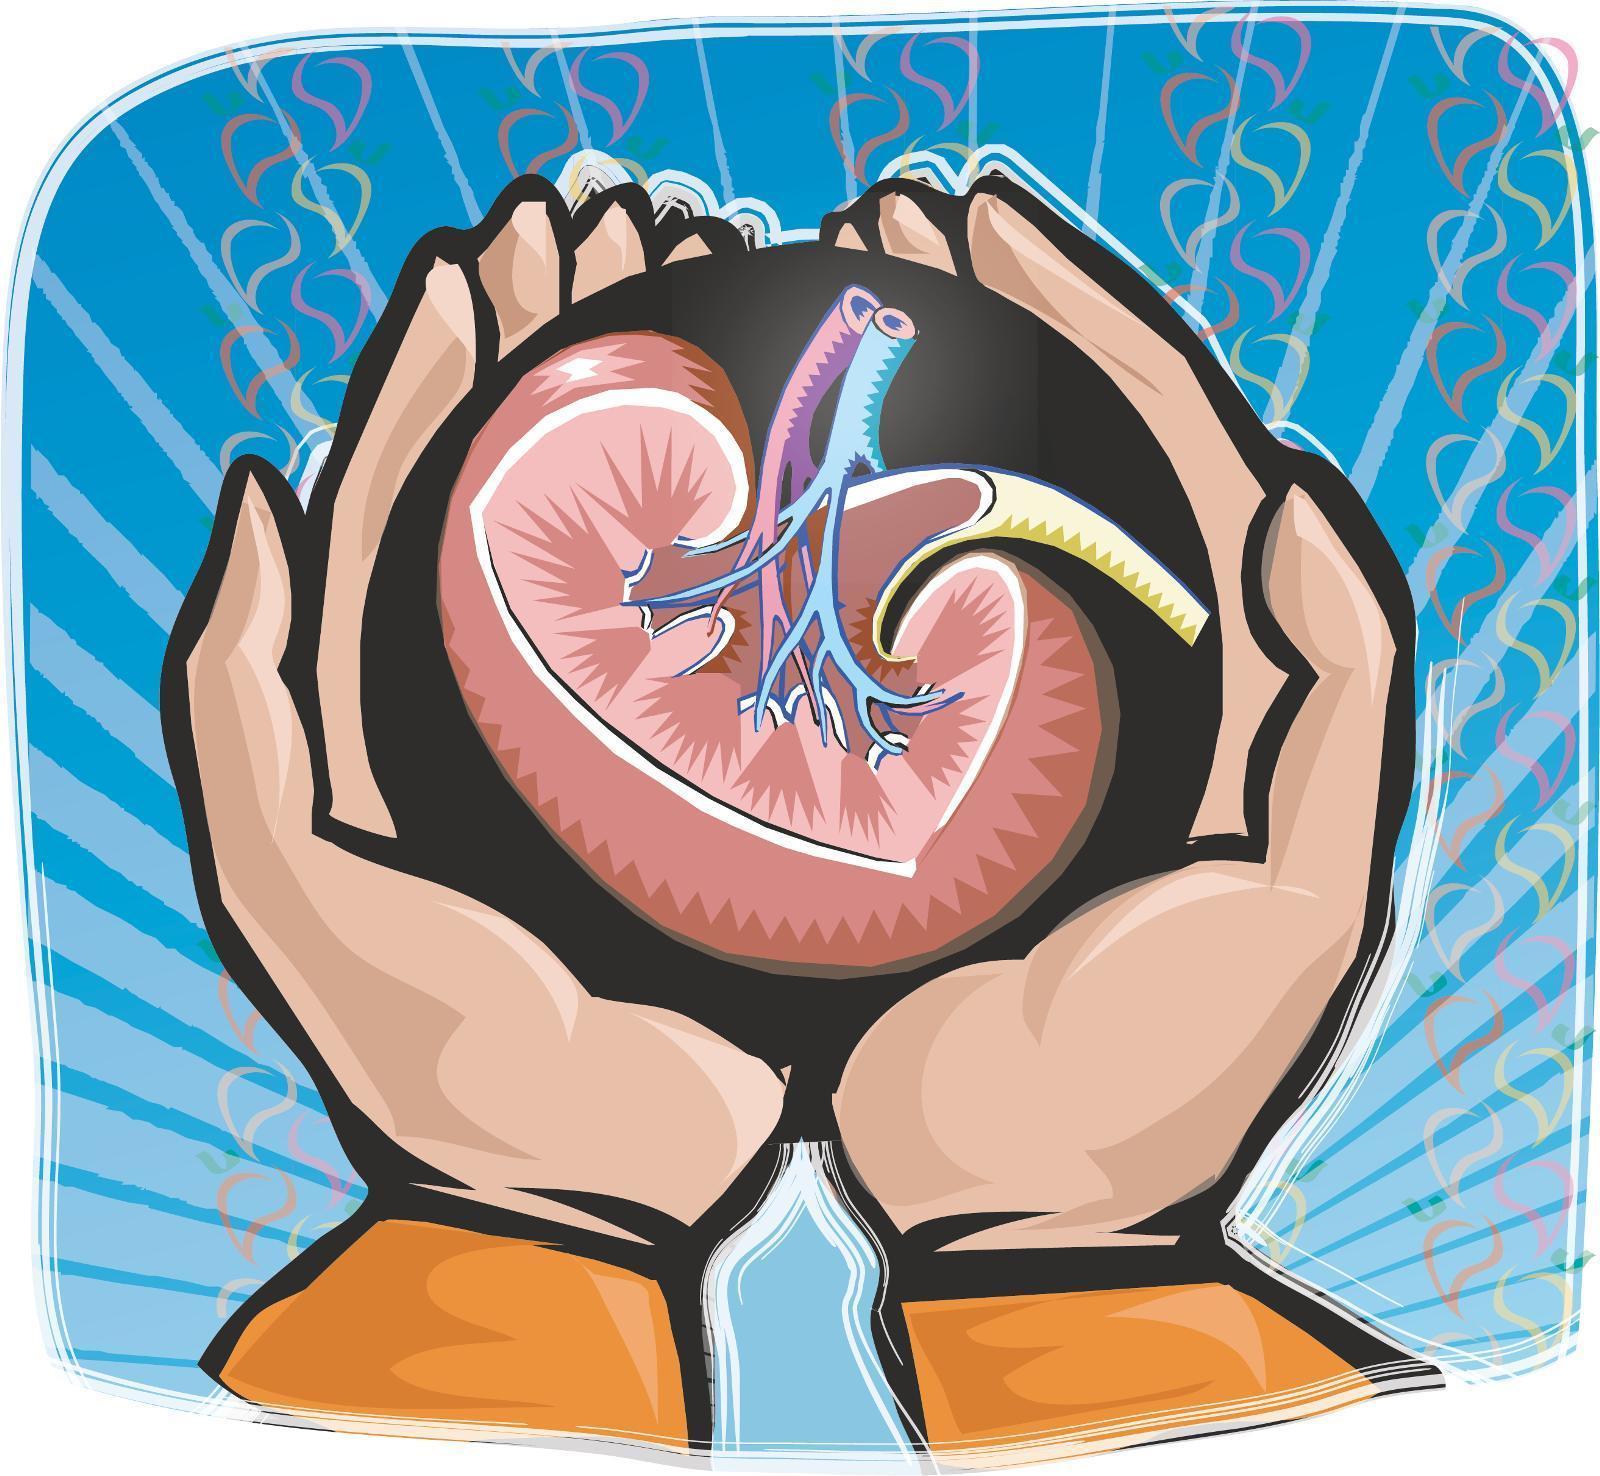 Aster offers low-cost kidney transplant surgeries